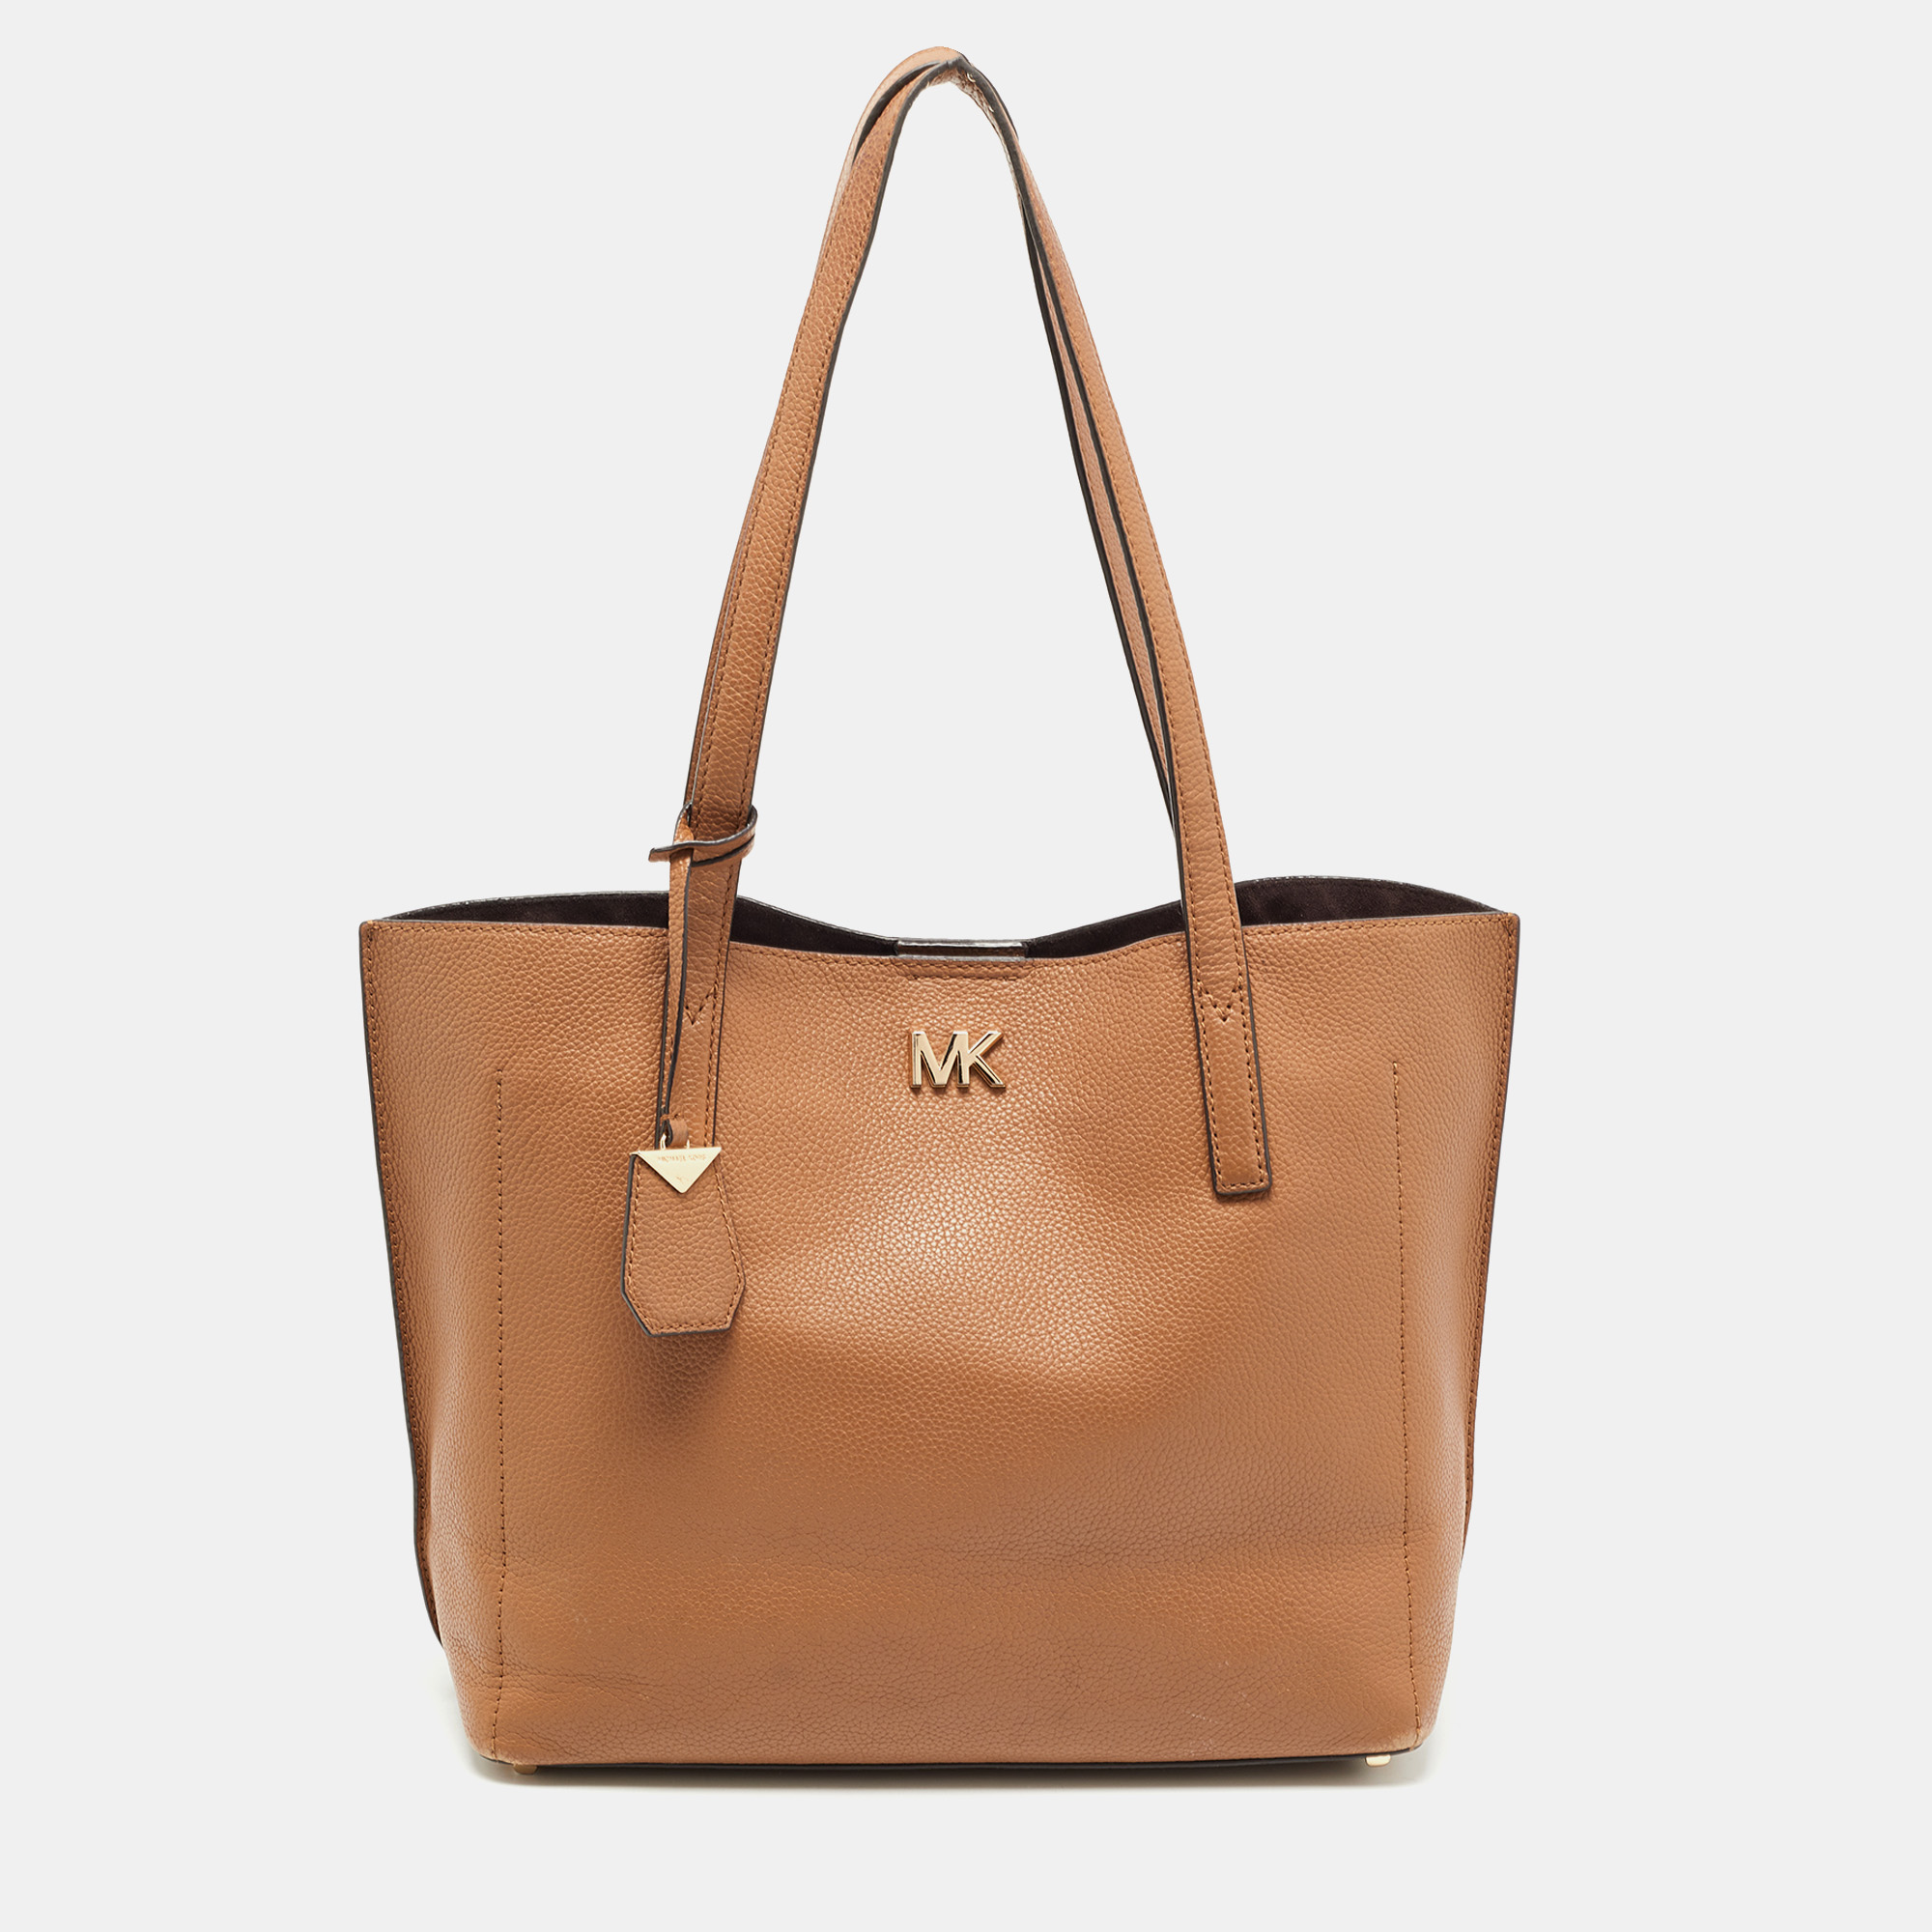 Pre-owned Michael Kors Brown Leather Ana Tote